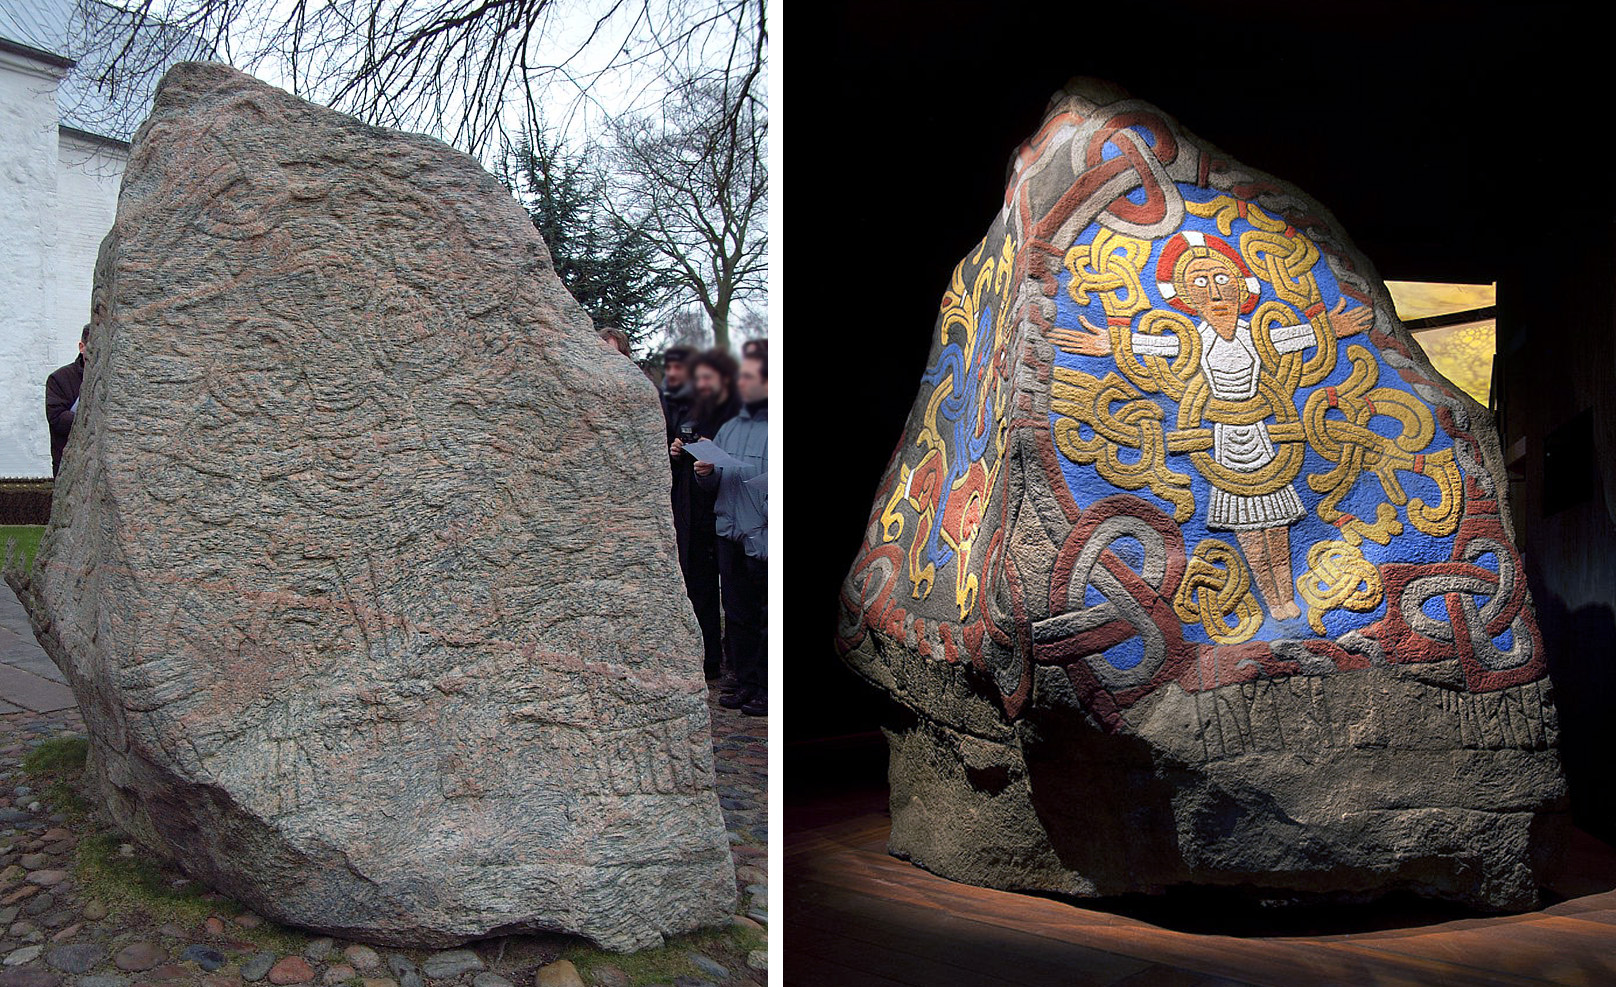 Jelling stone with traits of the Mammen style, 970 and circa 986, raised by King Bluetooth. Left: side A showing Christ bound in tendrils (photo: Caiospeia, CC BY-SA 2.0); right: side A with reconstruction of original polychromy (National Museum of Denmark)